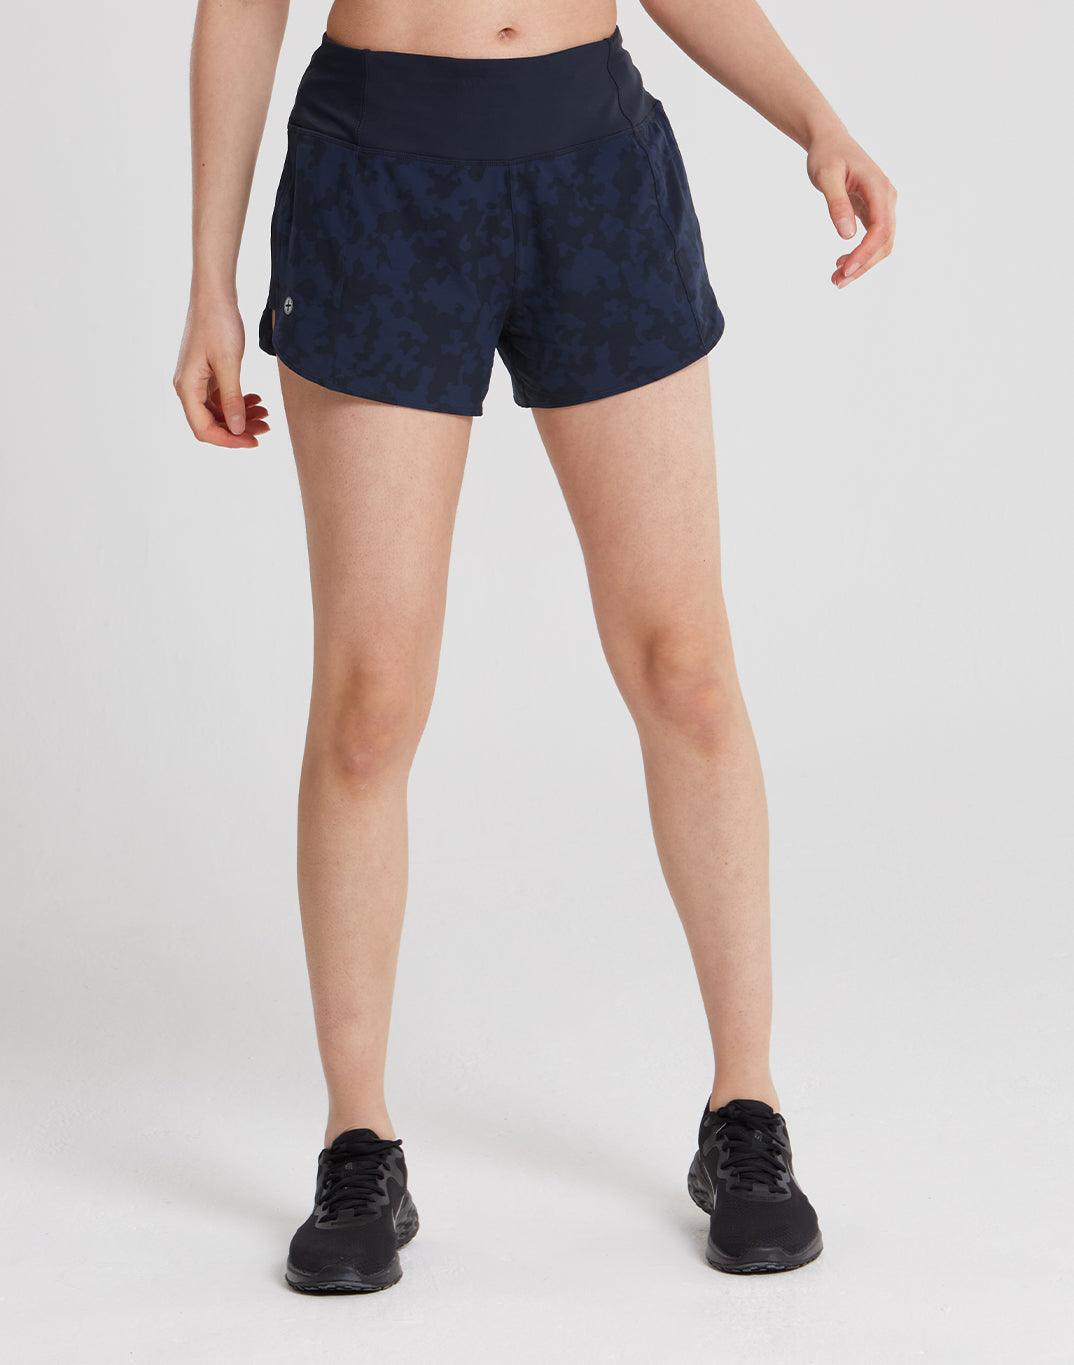 Contender 4" Shorts in Obsidian Camo Print - Shorts - Gym+Coffee IE